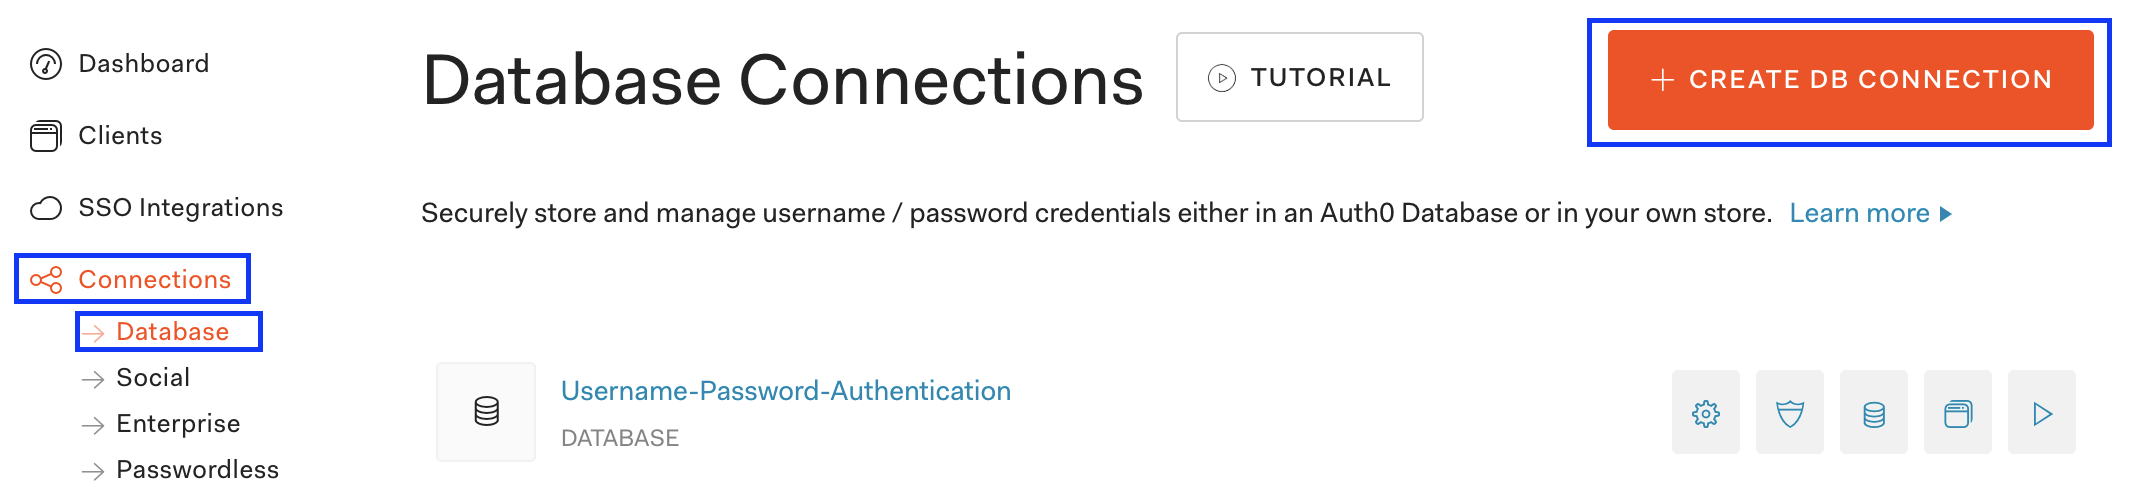 Auth0 DB CONNECTION 作成トップ